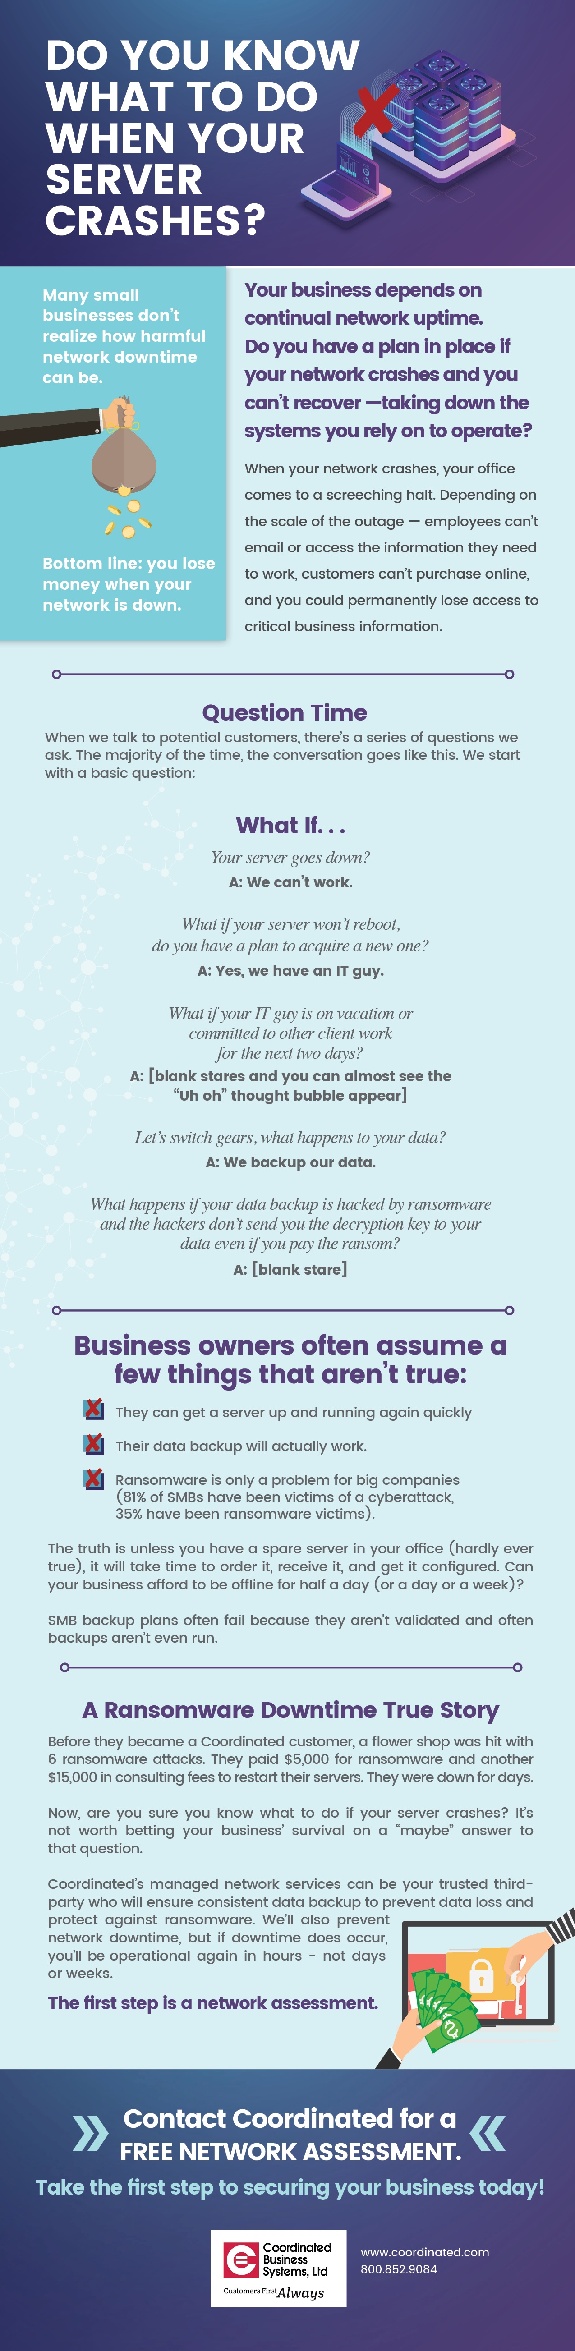 [Free Infographic] Do You Know What To Do When Your Server Crashes